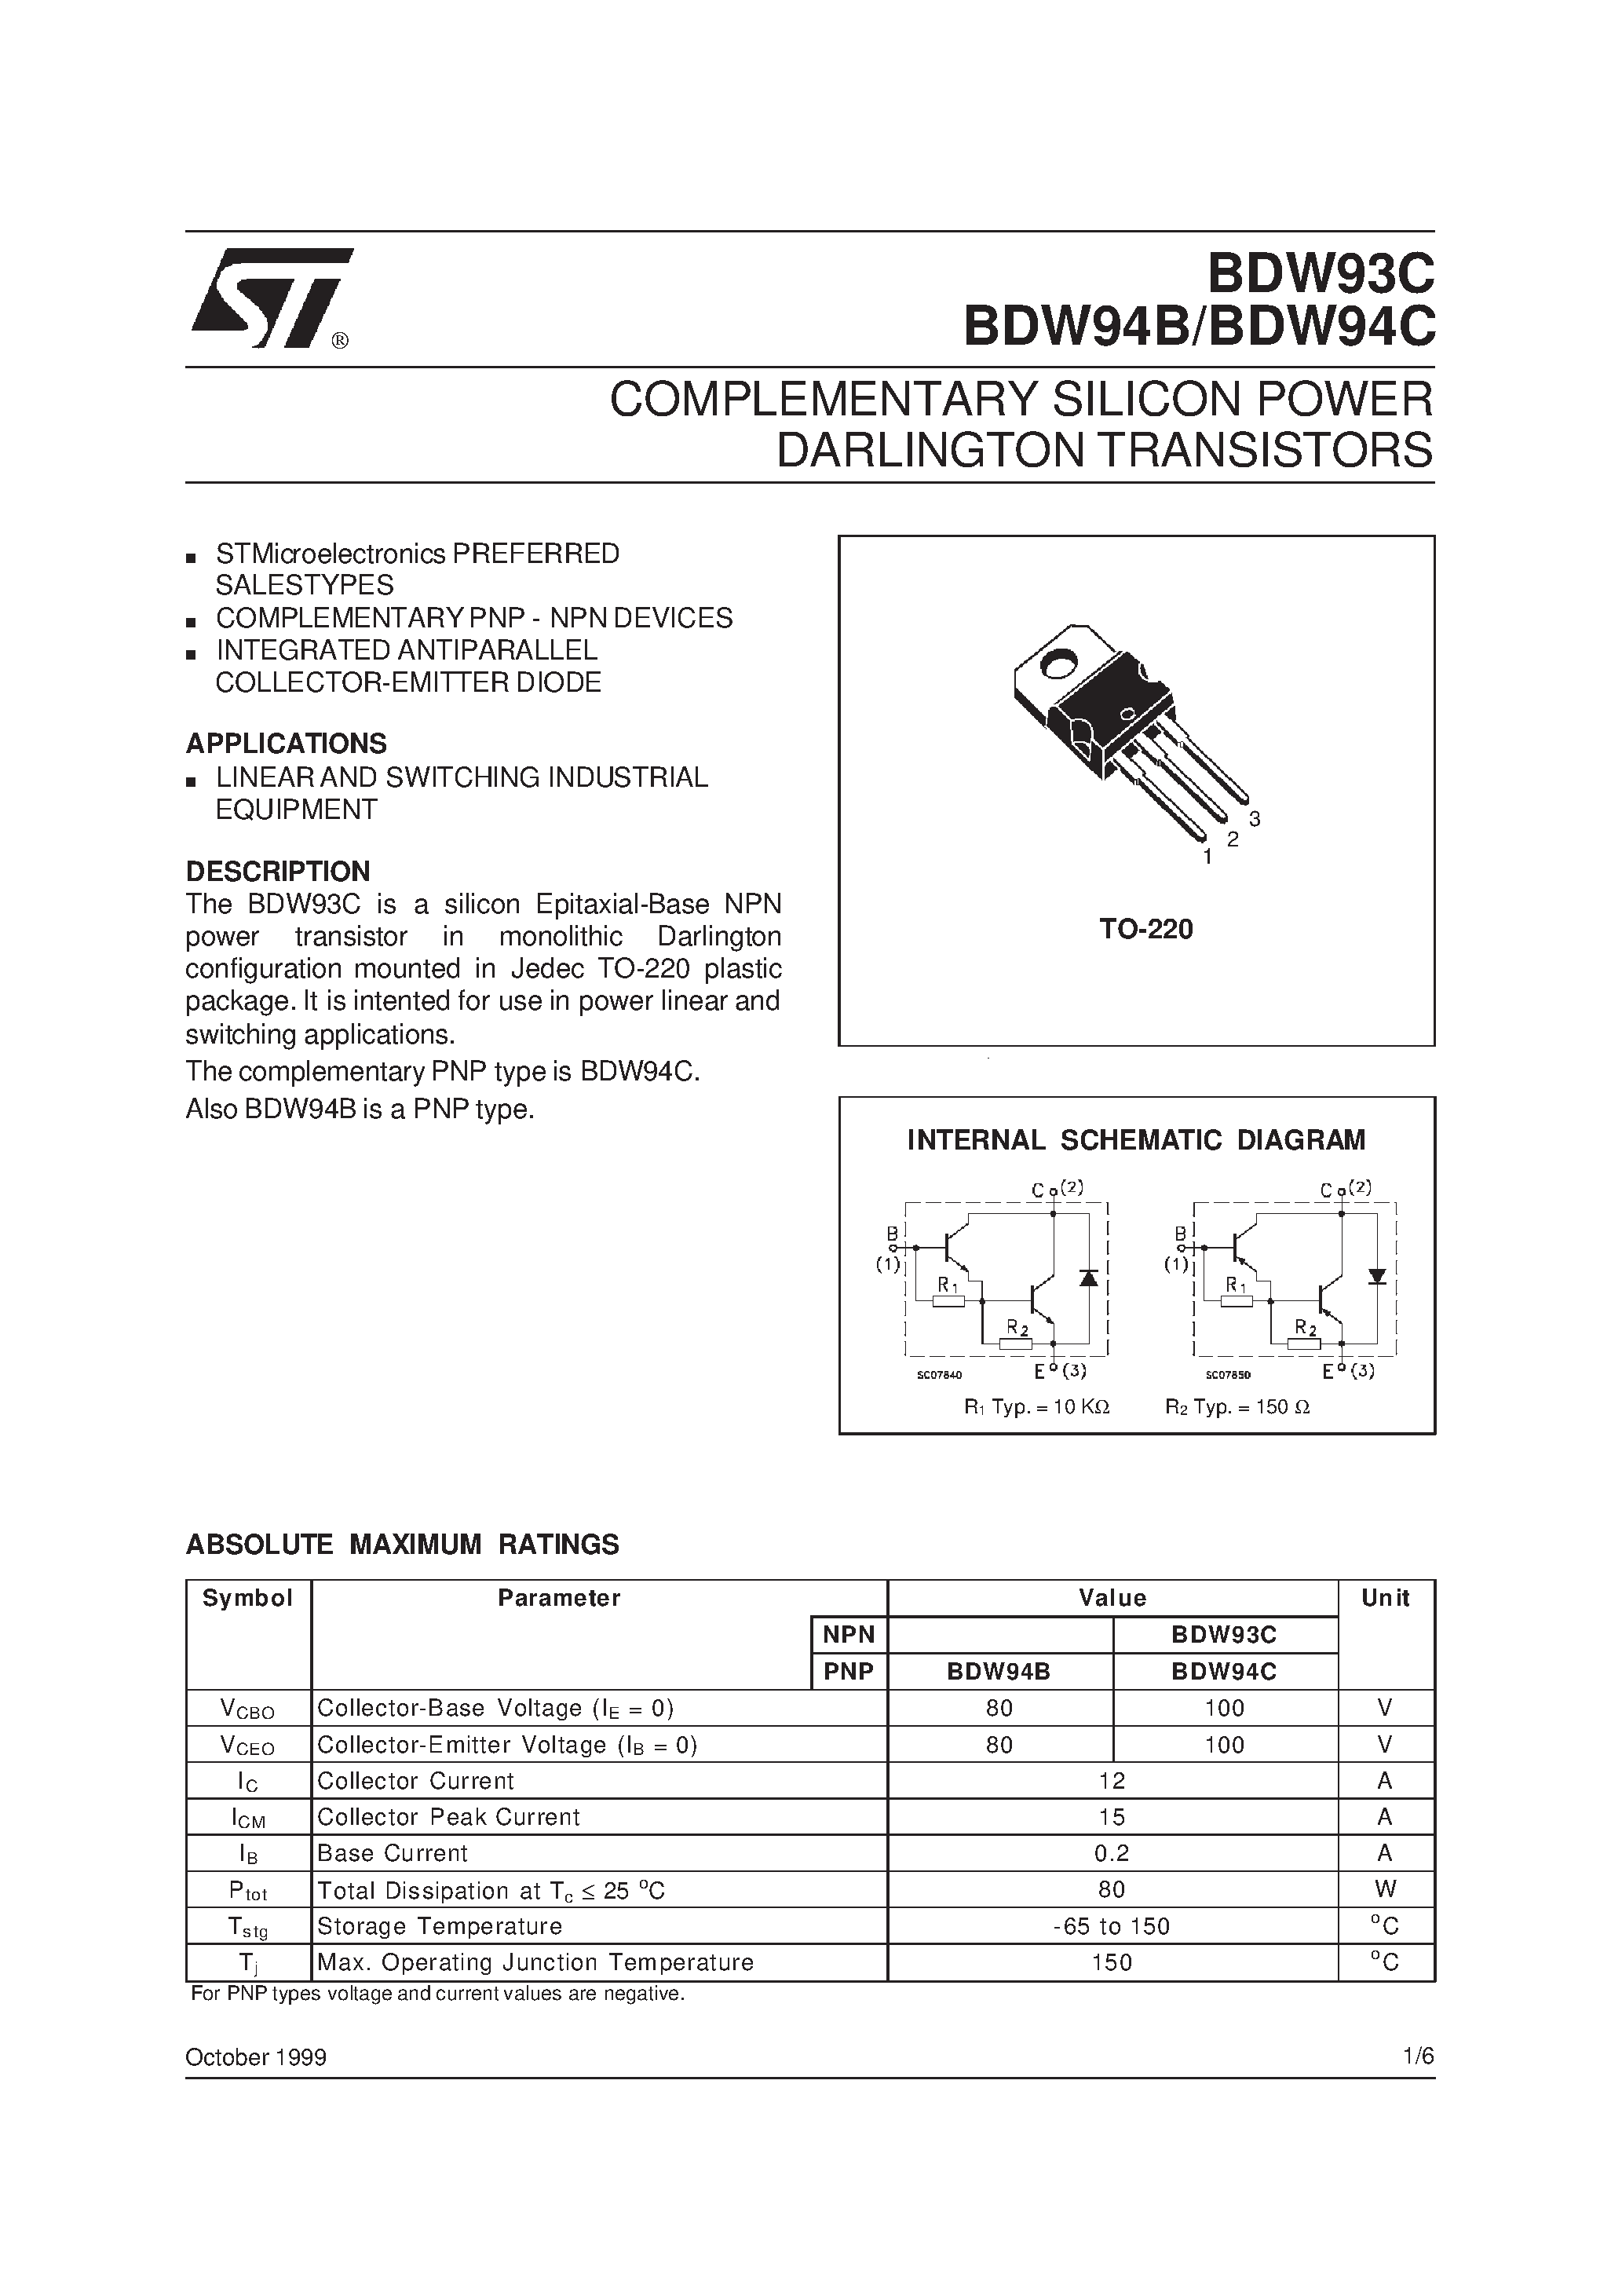 Datasheet BDW94B - COMPLEMENTARY SILICON POWER DARLINGTON TRANSISTORS page 1